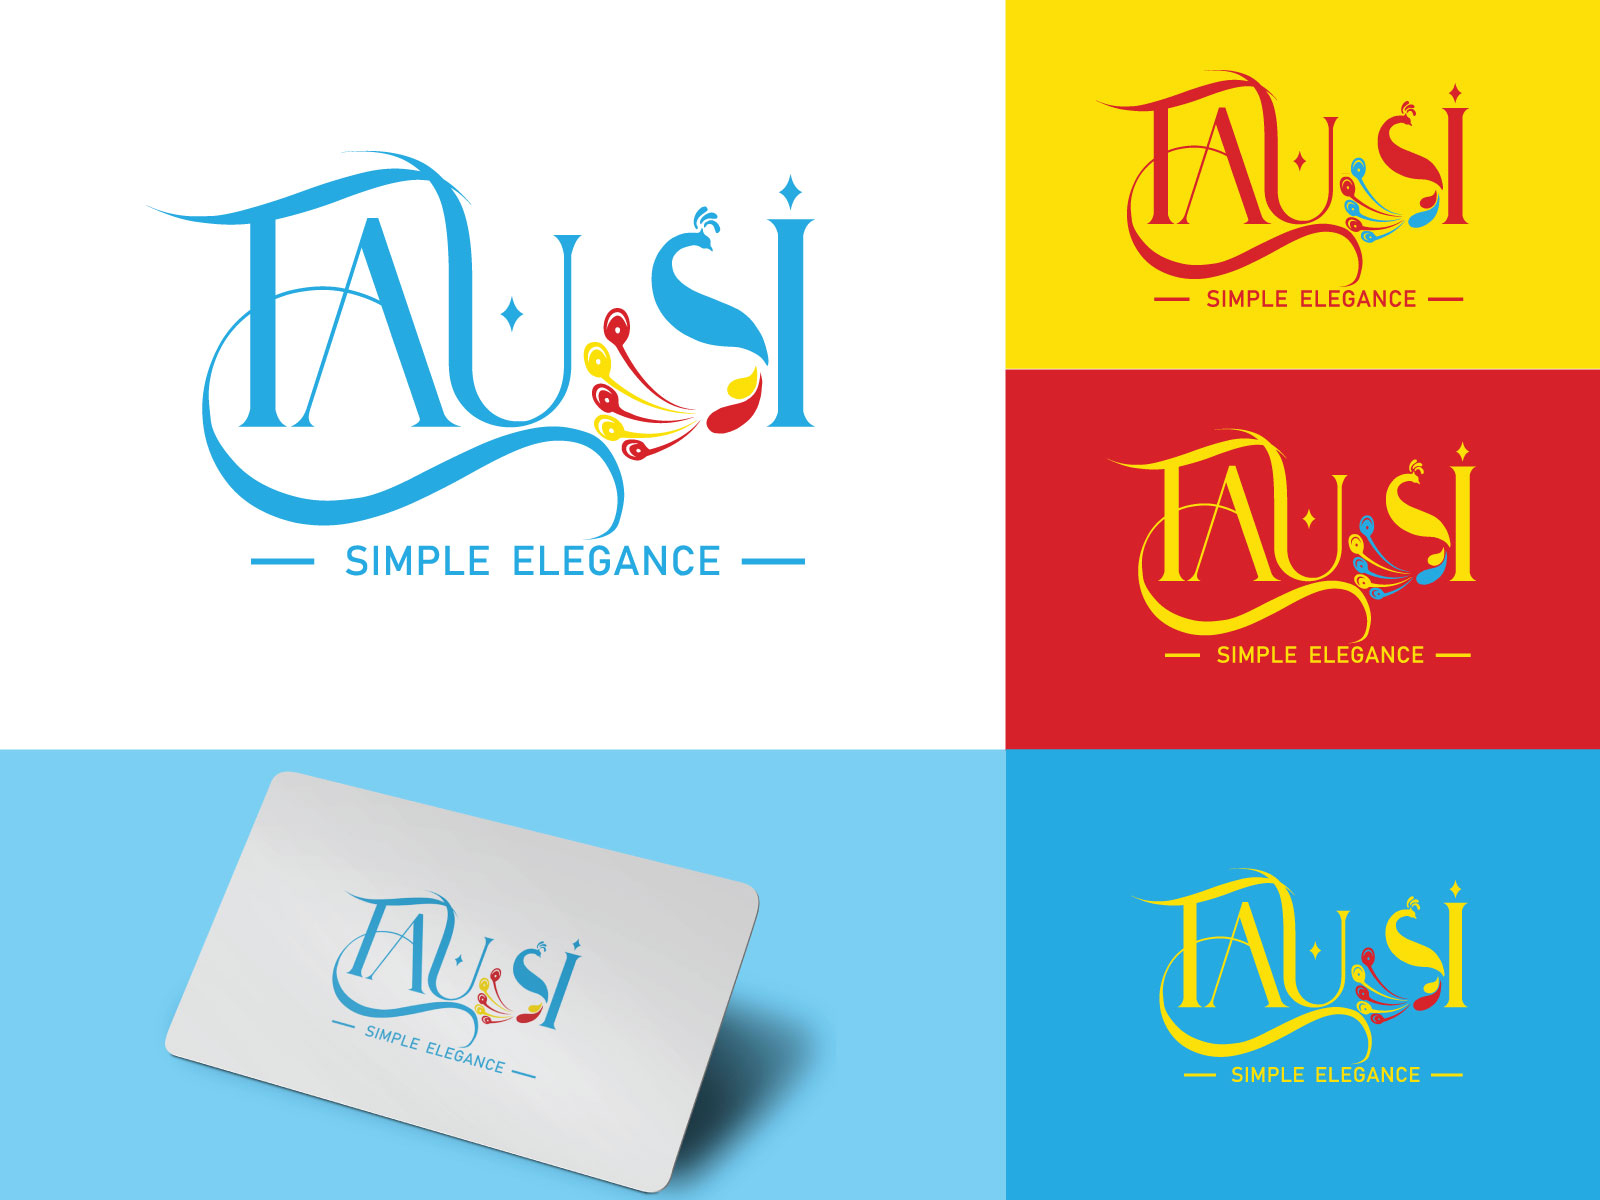 tausi-by-alexander-macharia-on-dribbble